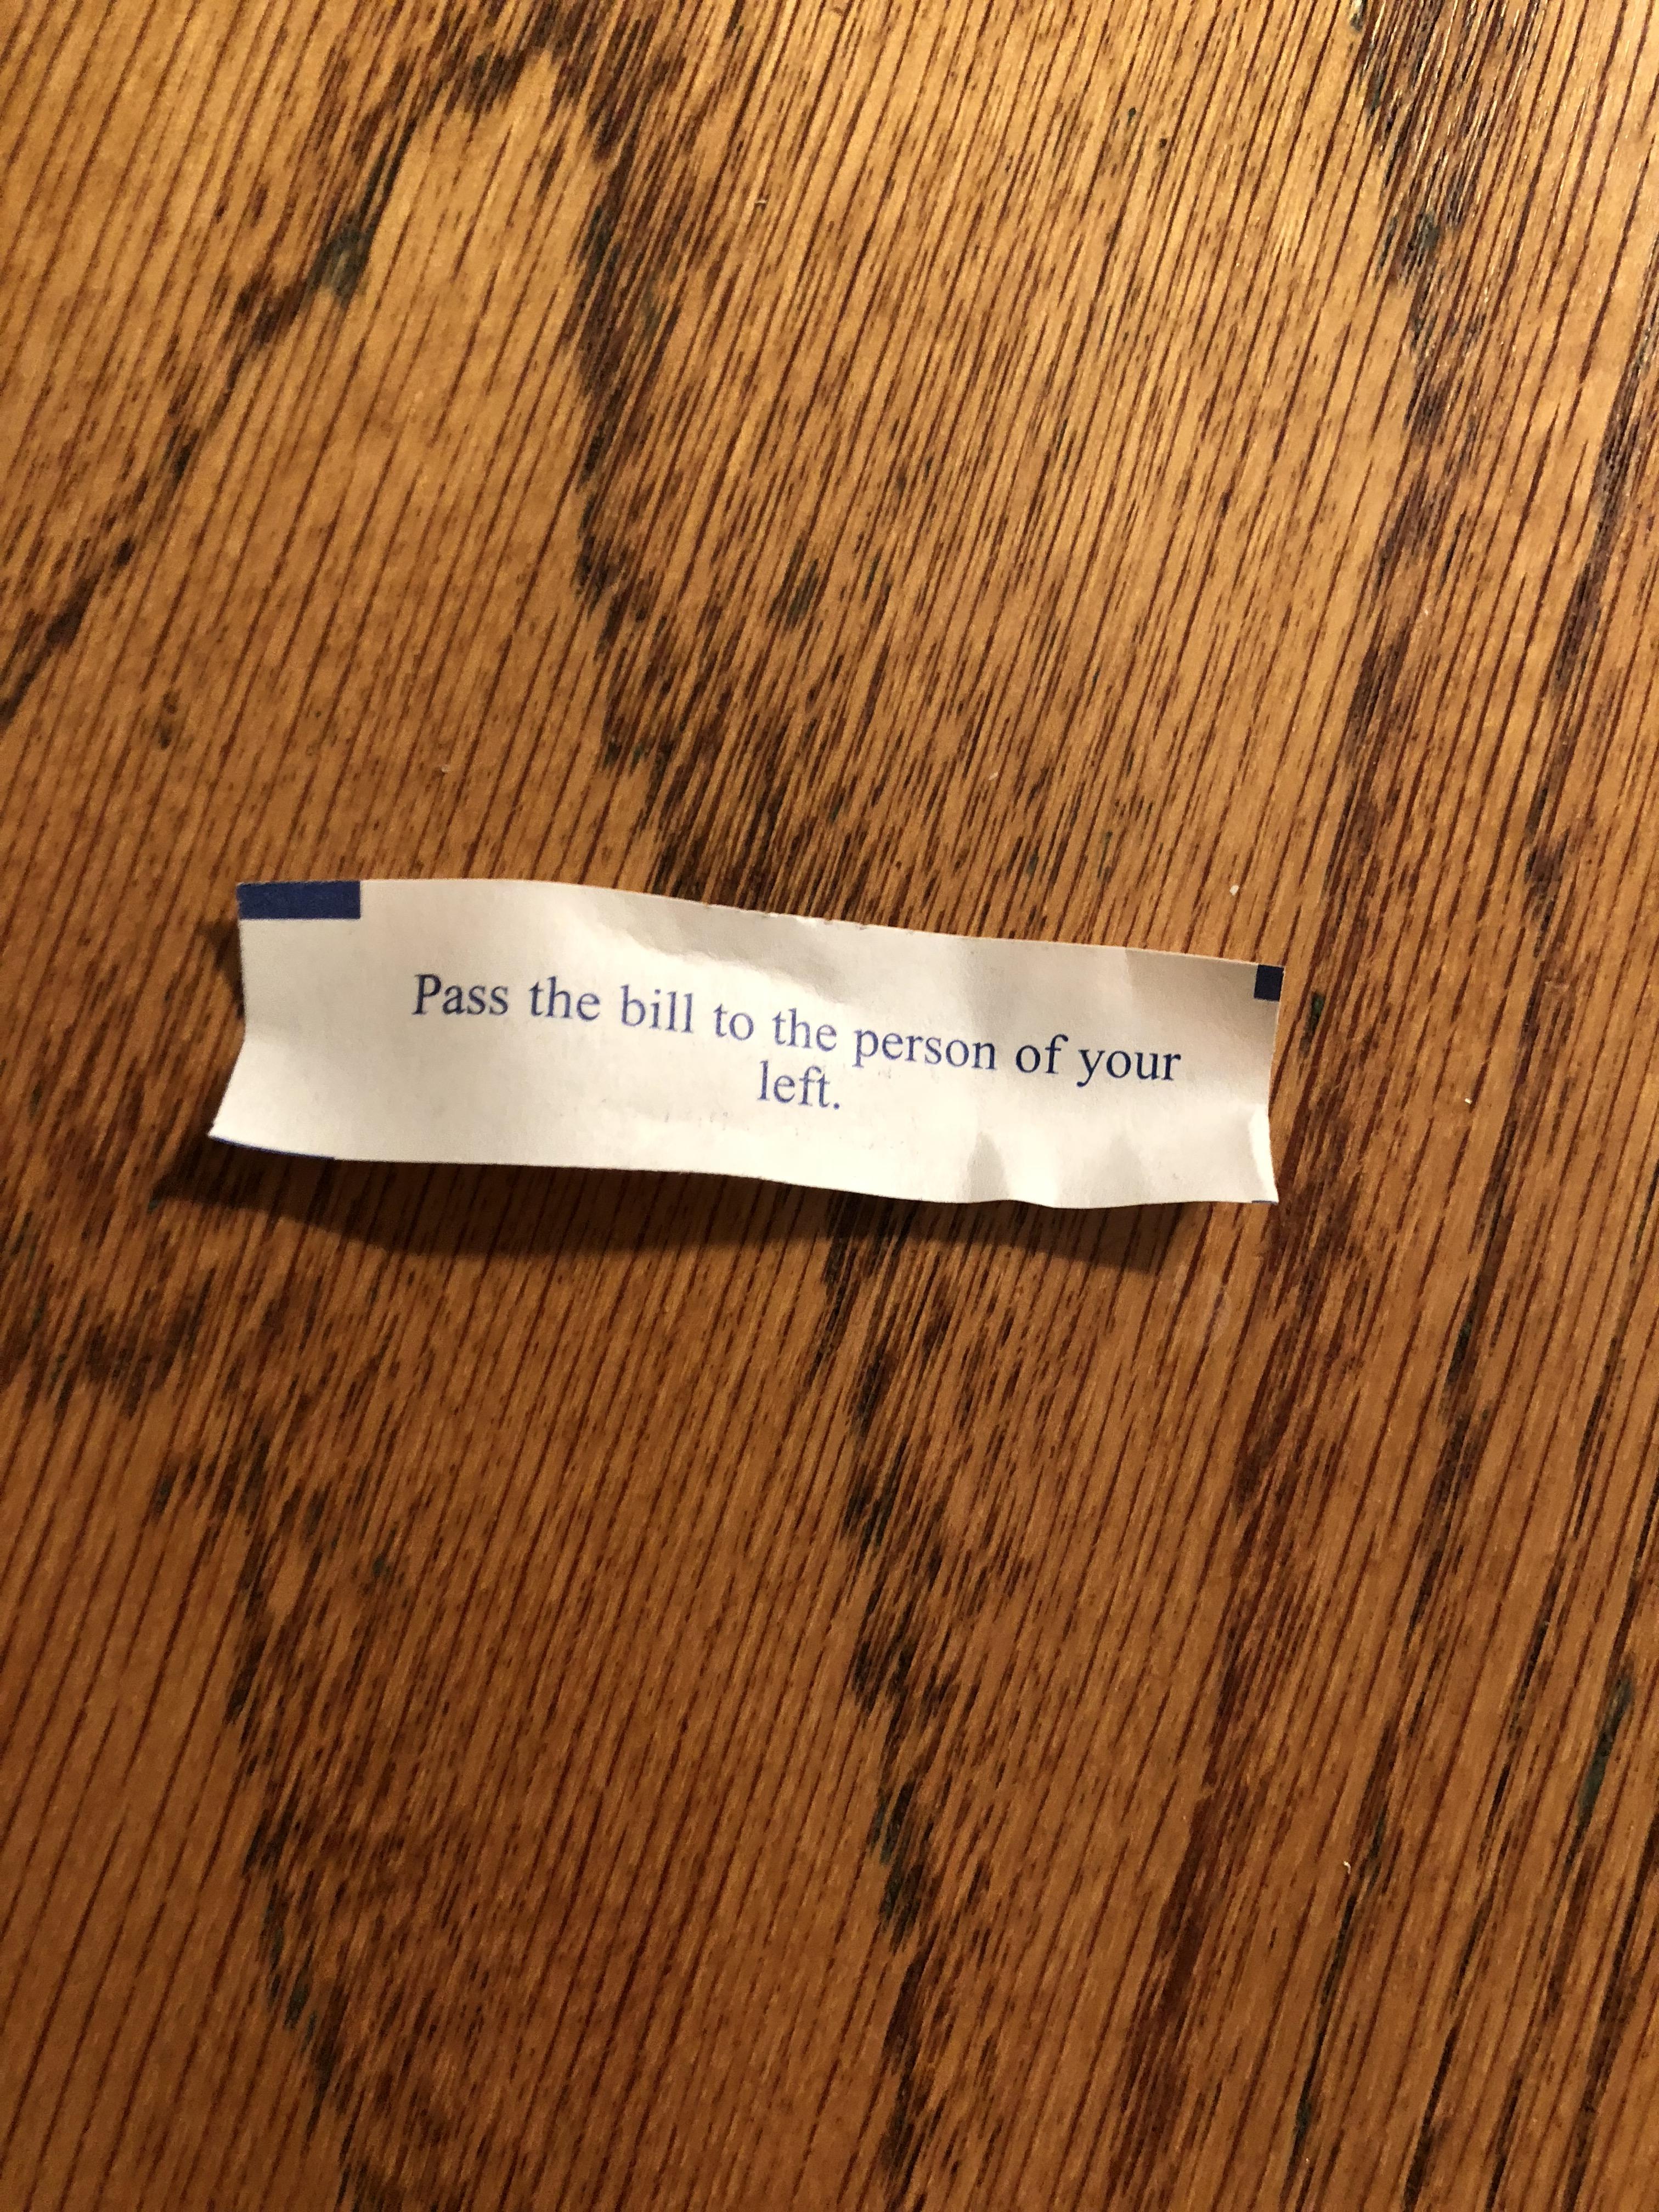 30 Hilarious Messages Found In Fortune Cookies — InspireMore